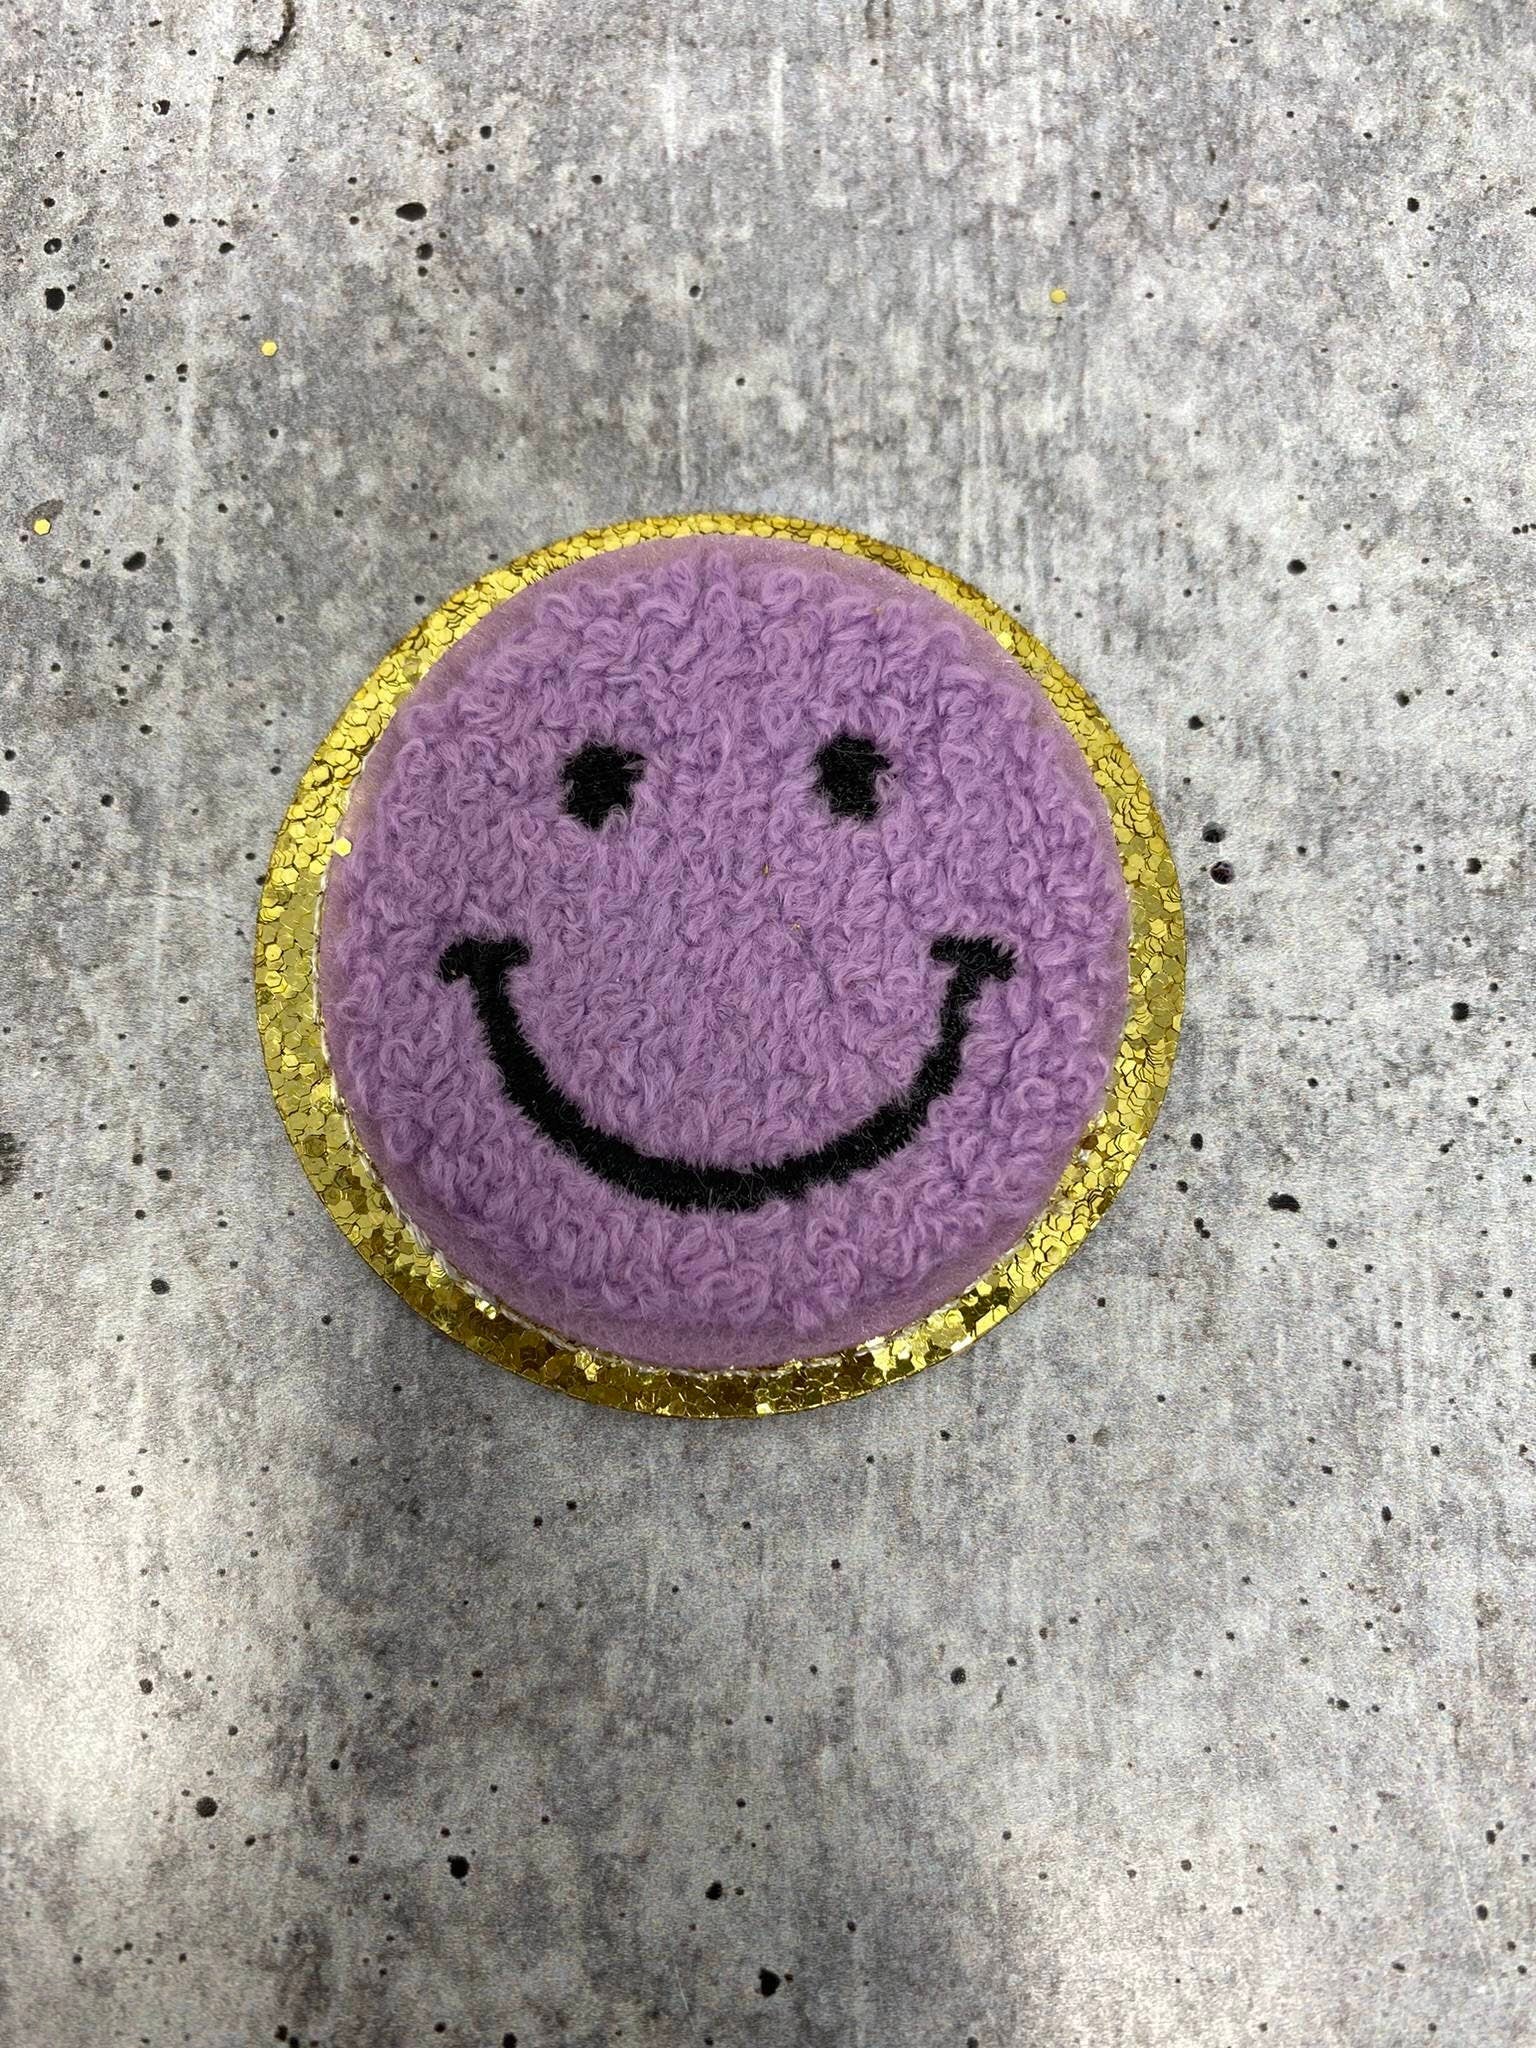 New: Purple, Chenille "Smile Patch" w/ Gold Glitter, Size 2.5", Smiley Face Patch with Iron-on Backing, Fuzzy Happy Face Applique, Fun Patch